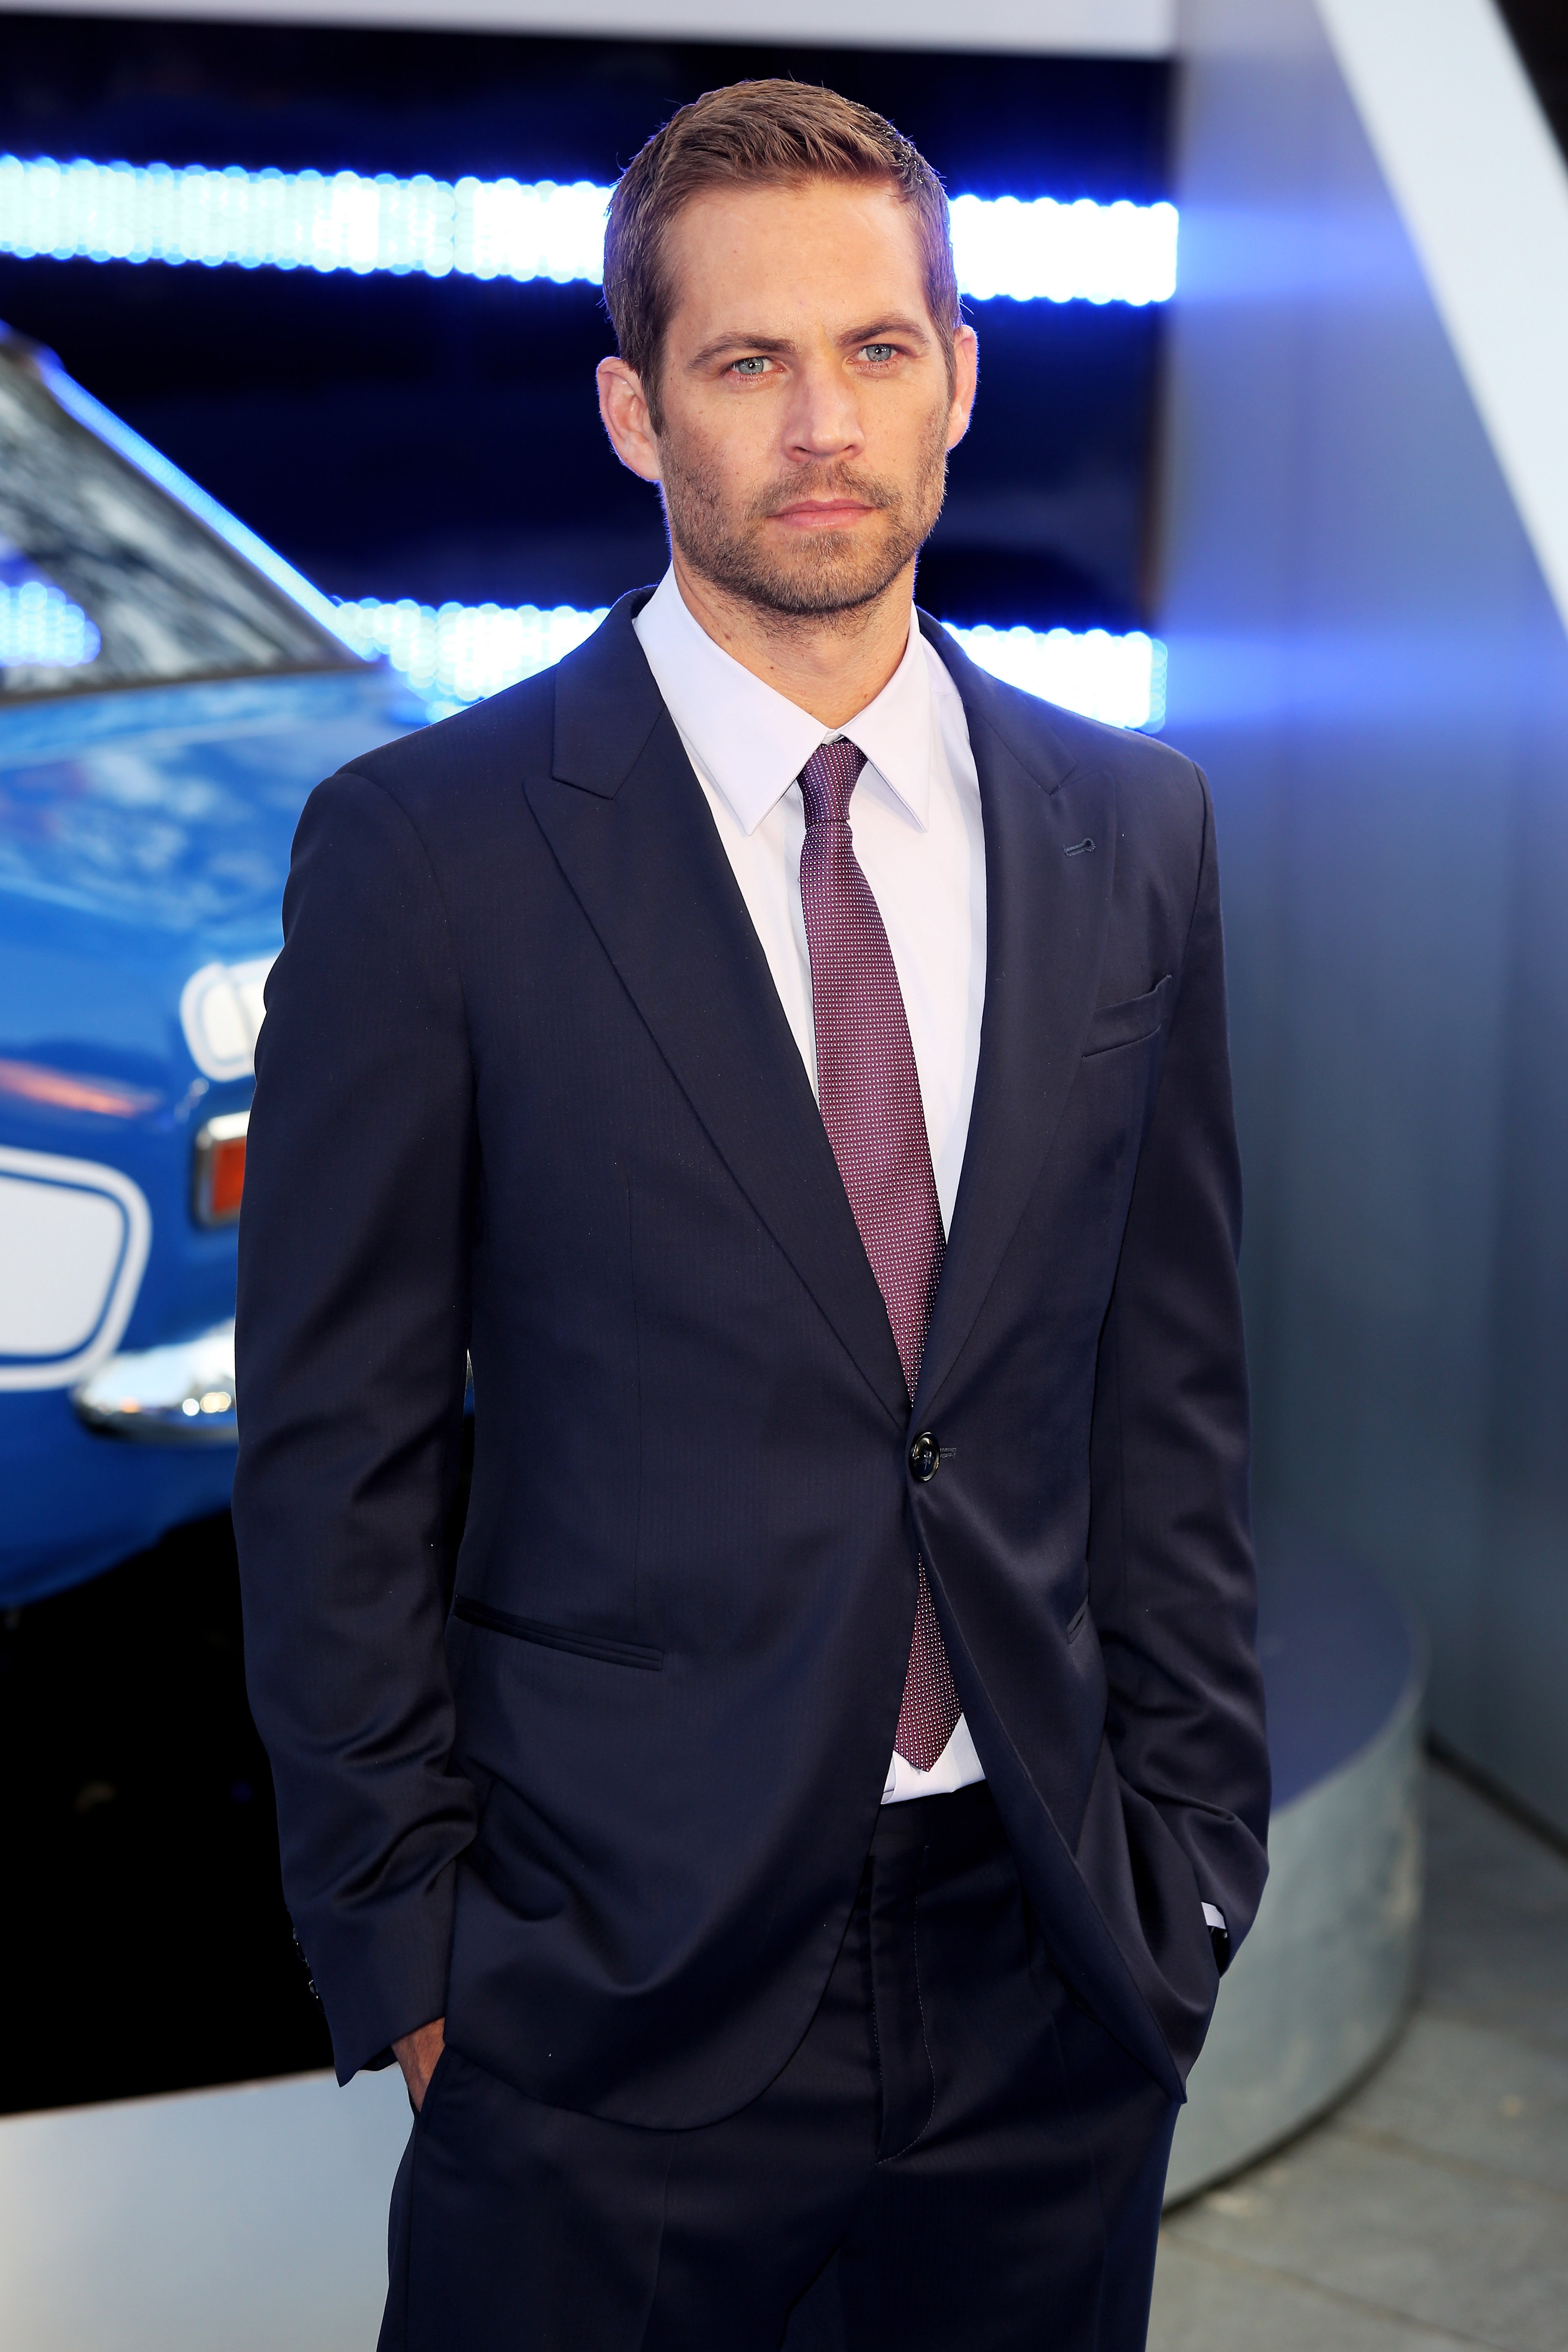 Paul Walker attends the World Premiere of 'Fast & Furious 6' at Empire Leicester Square on May 7, 2013, in London, England. | Source: Getty Images.